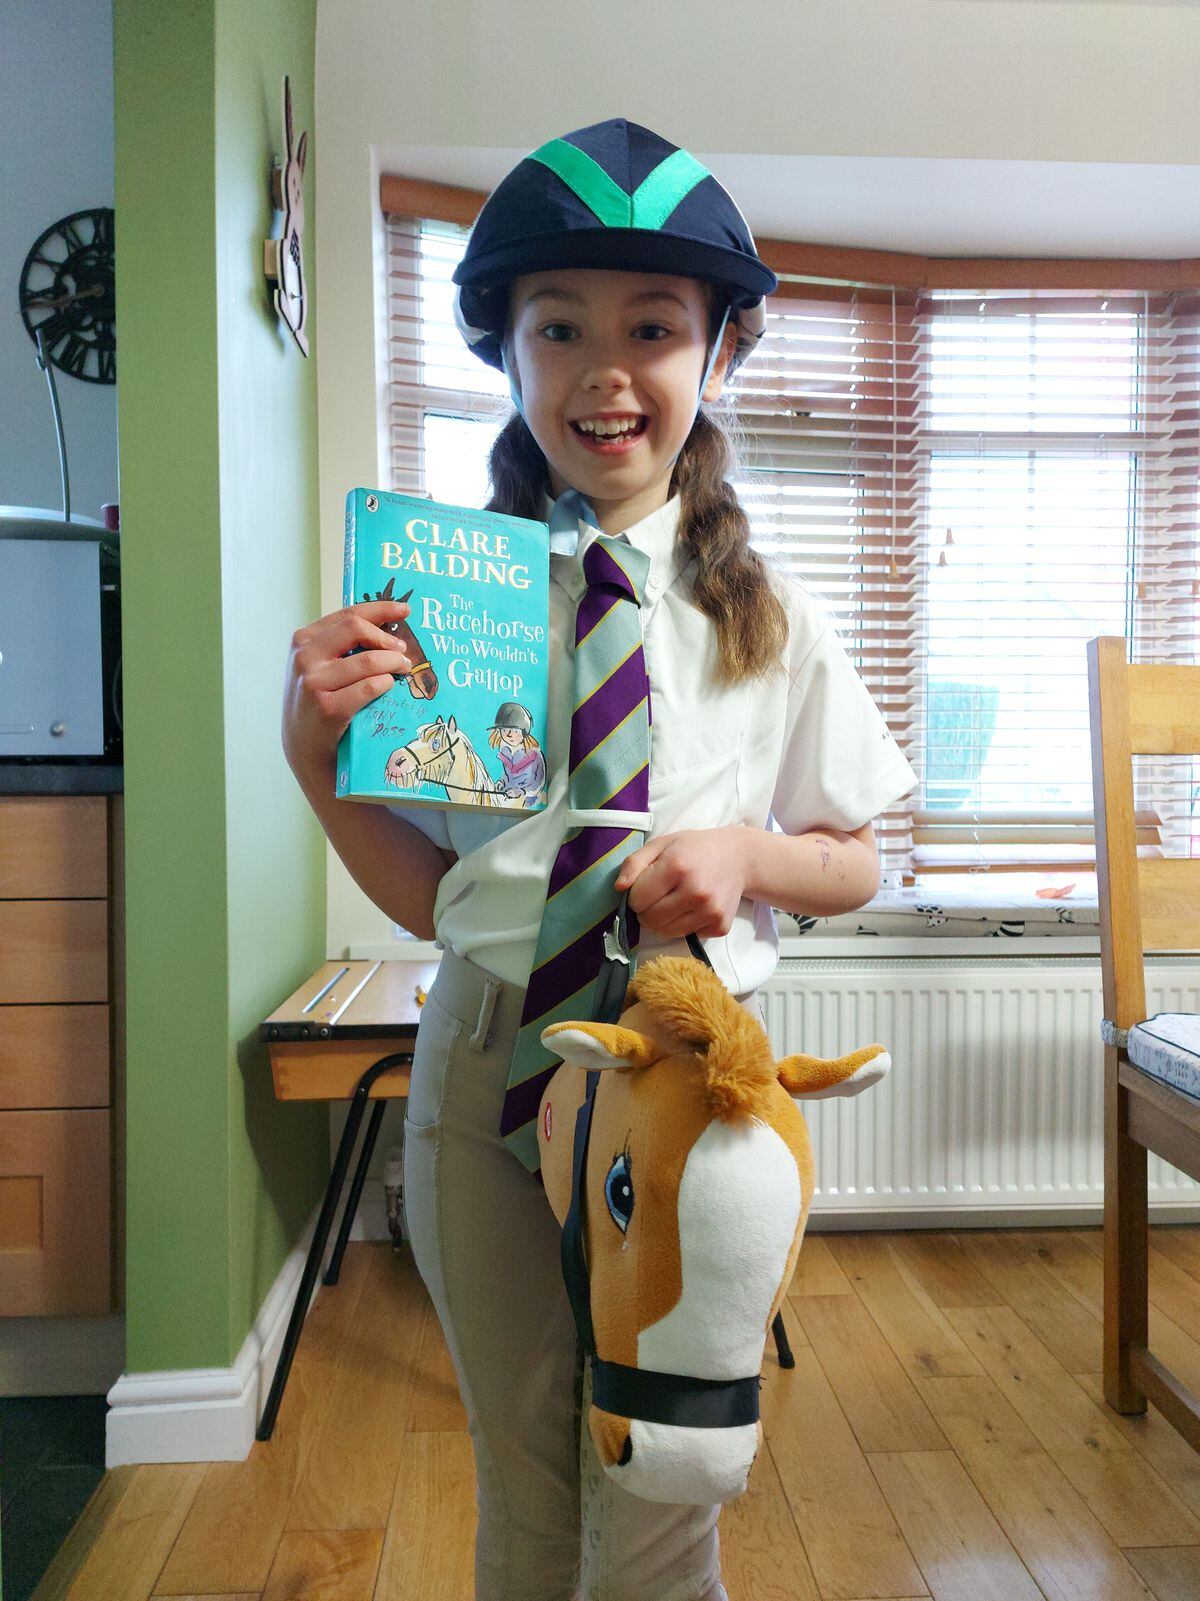 Evangeline Thomson (aged 8) as Polly Williams from The Racehorse Who Wouldn't Gallop by Clare Balding